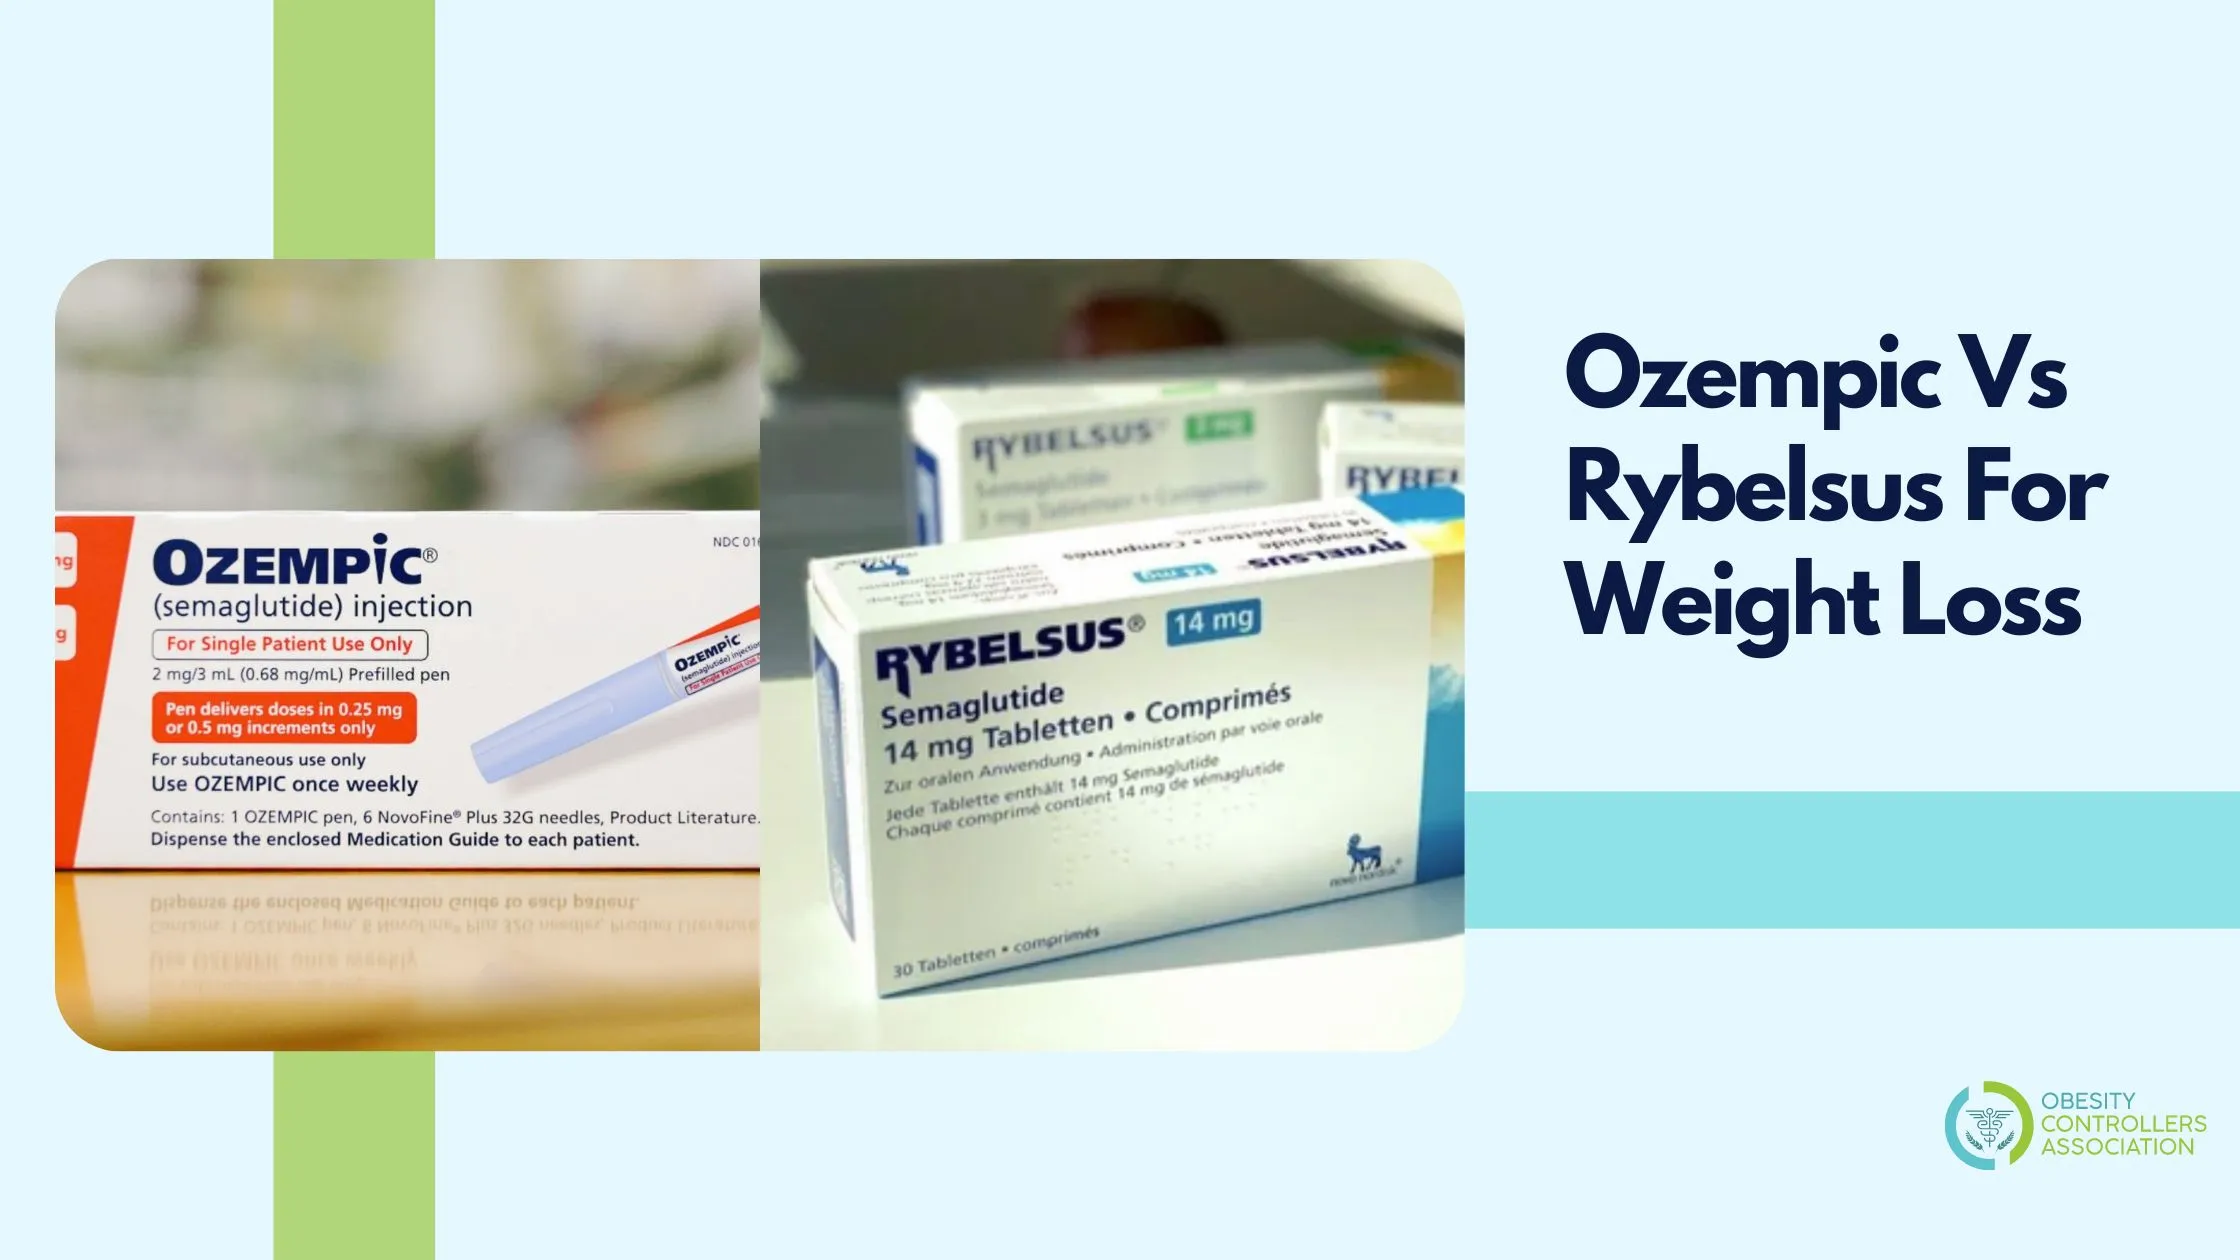 Ozempic Or Rybelsus Better For Weight Loss